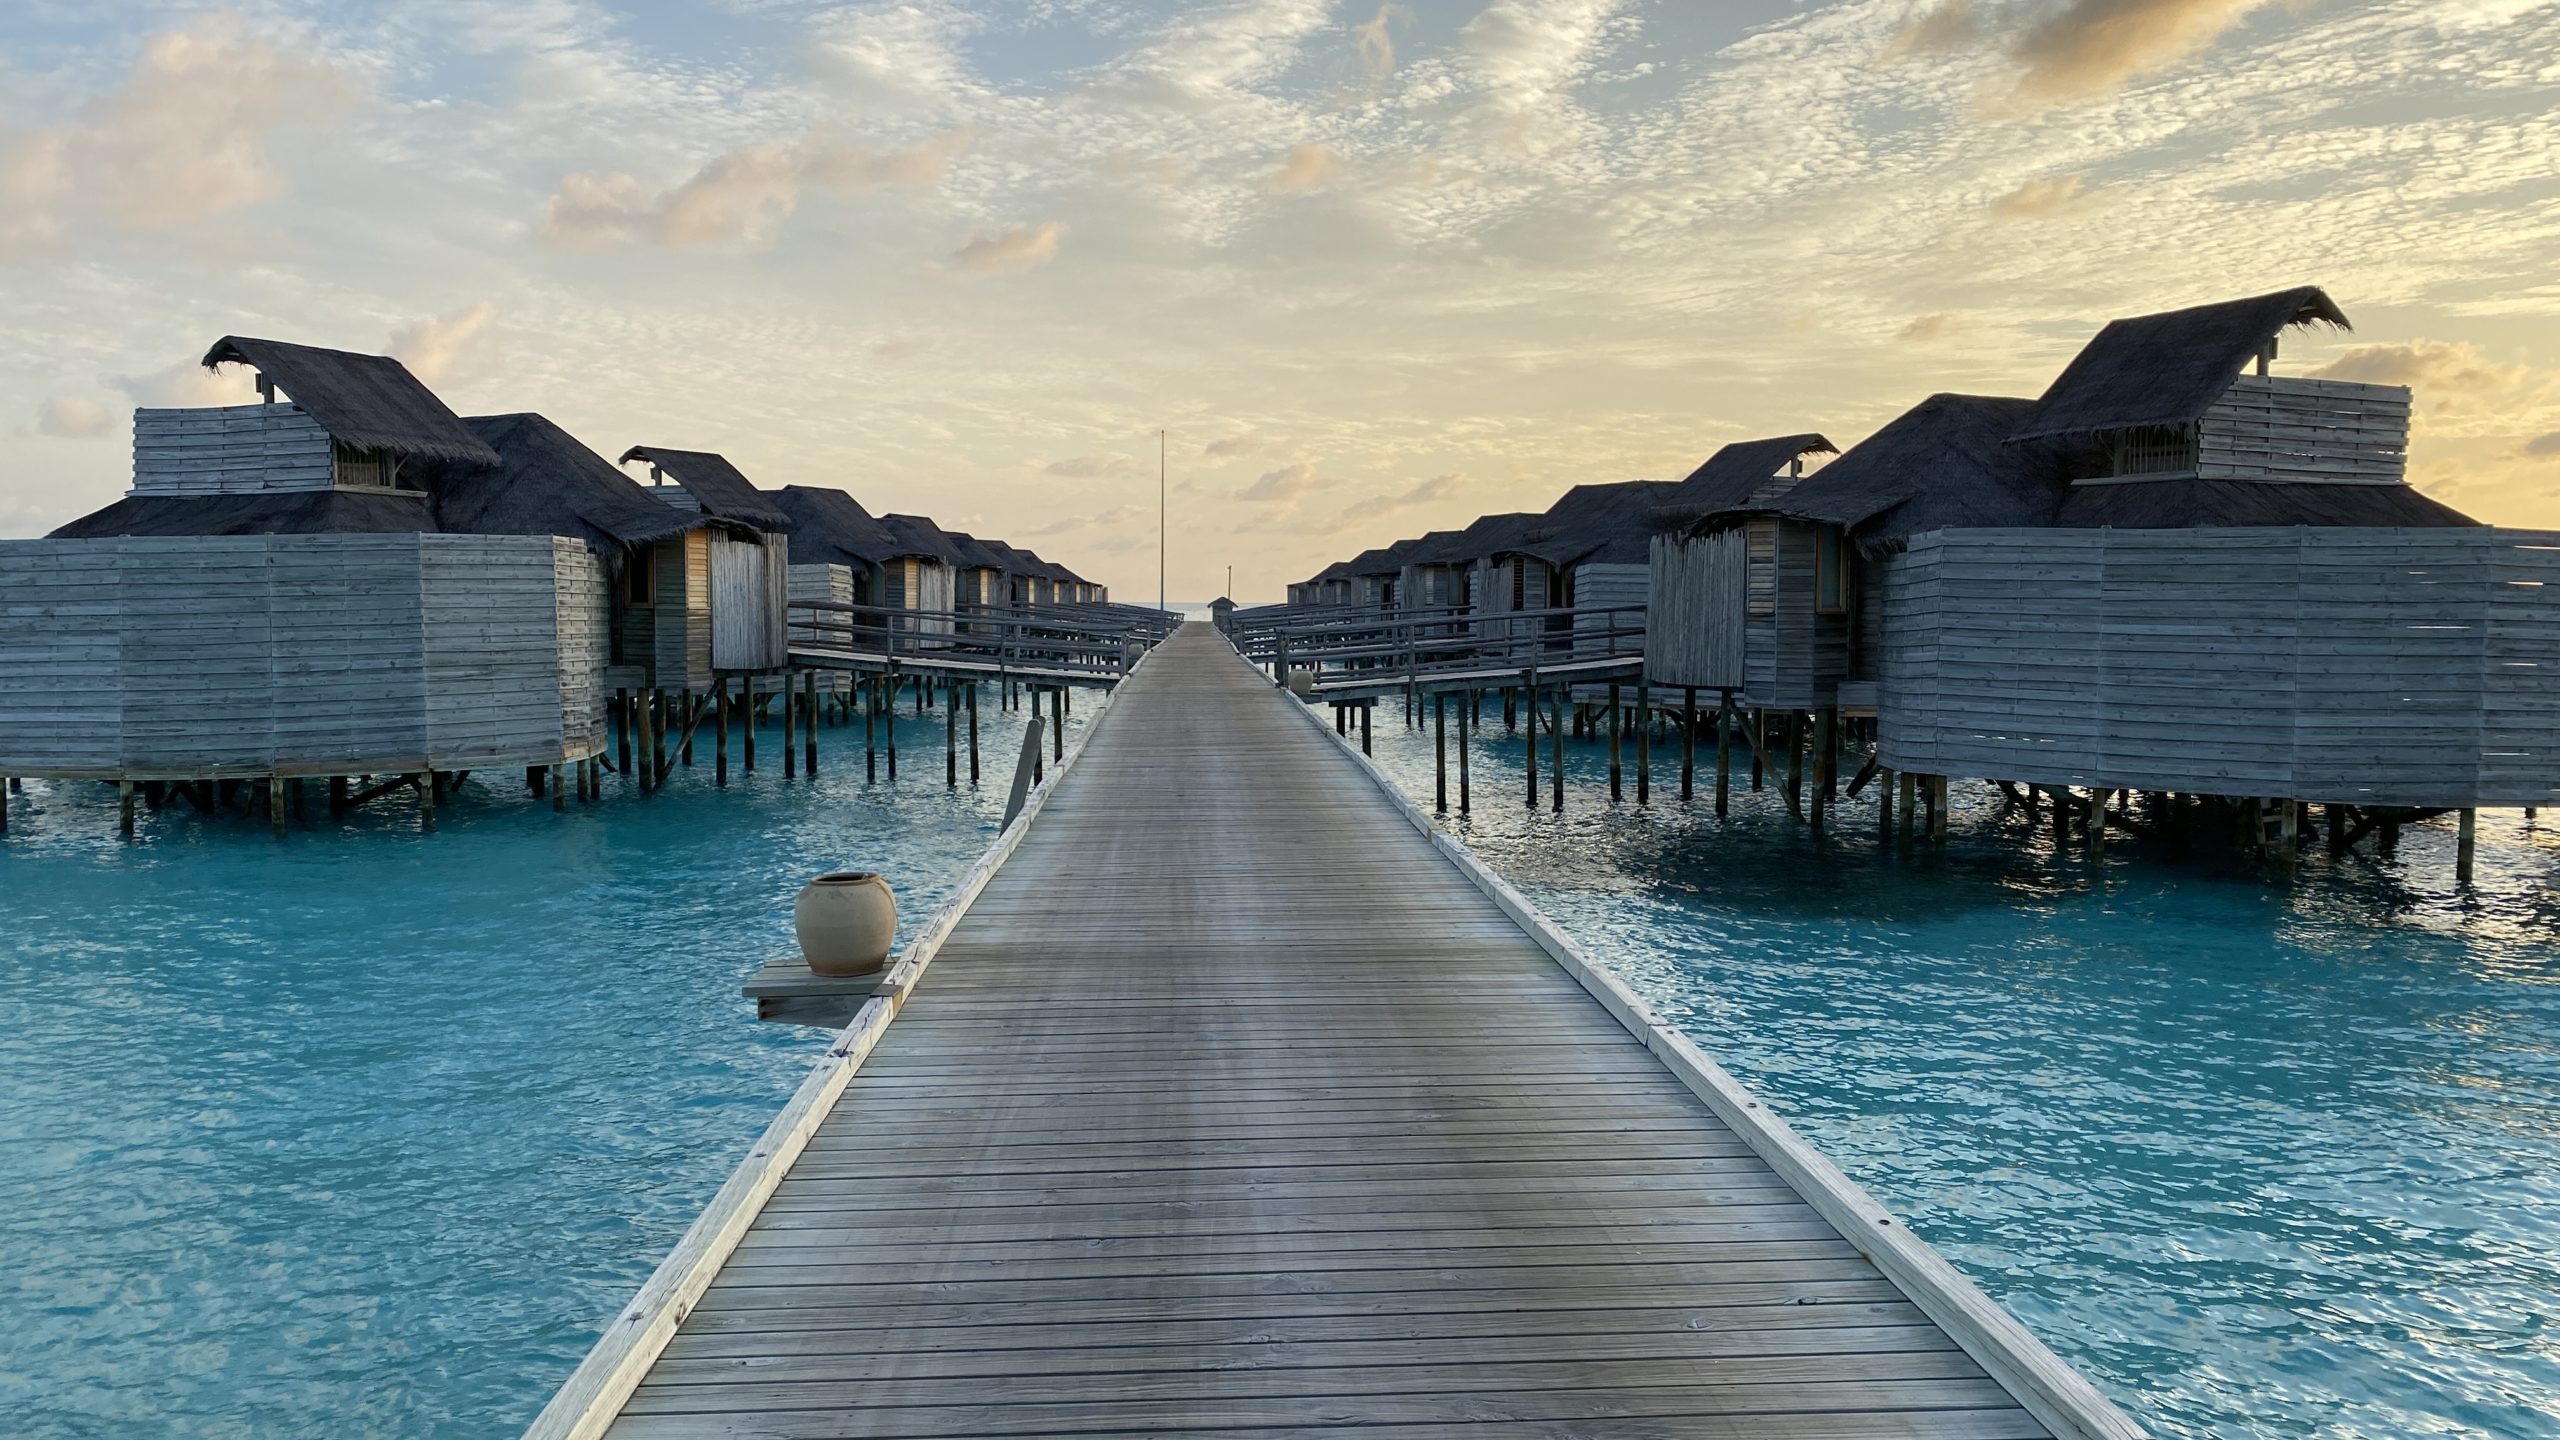 a wooden walkway leading to a row of huts on stilts